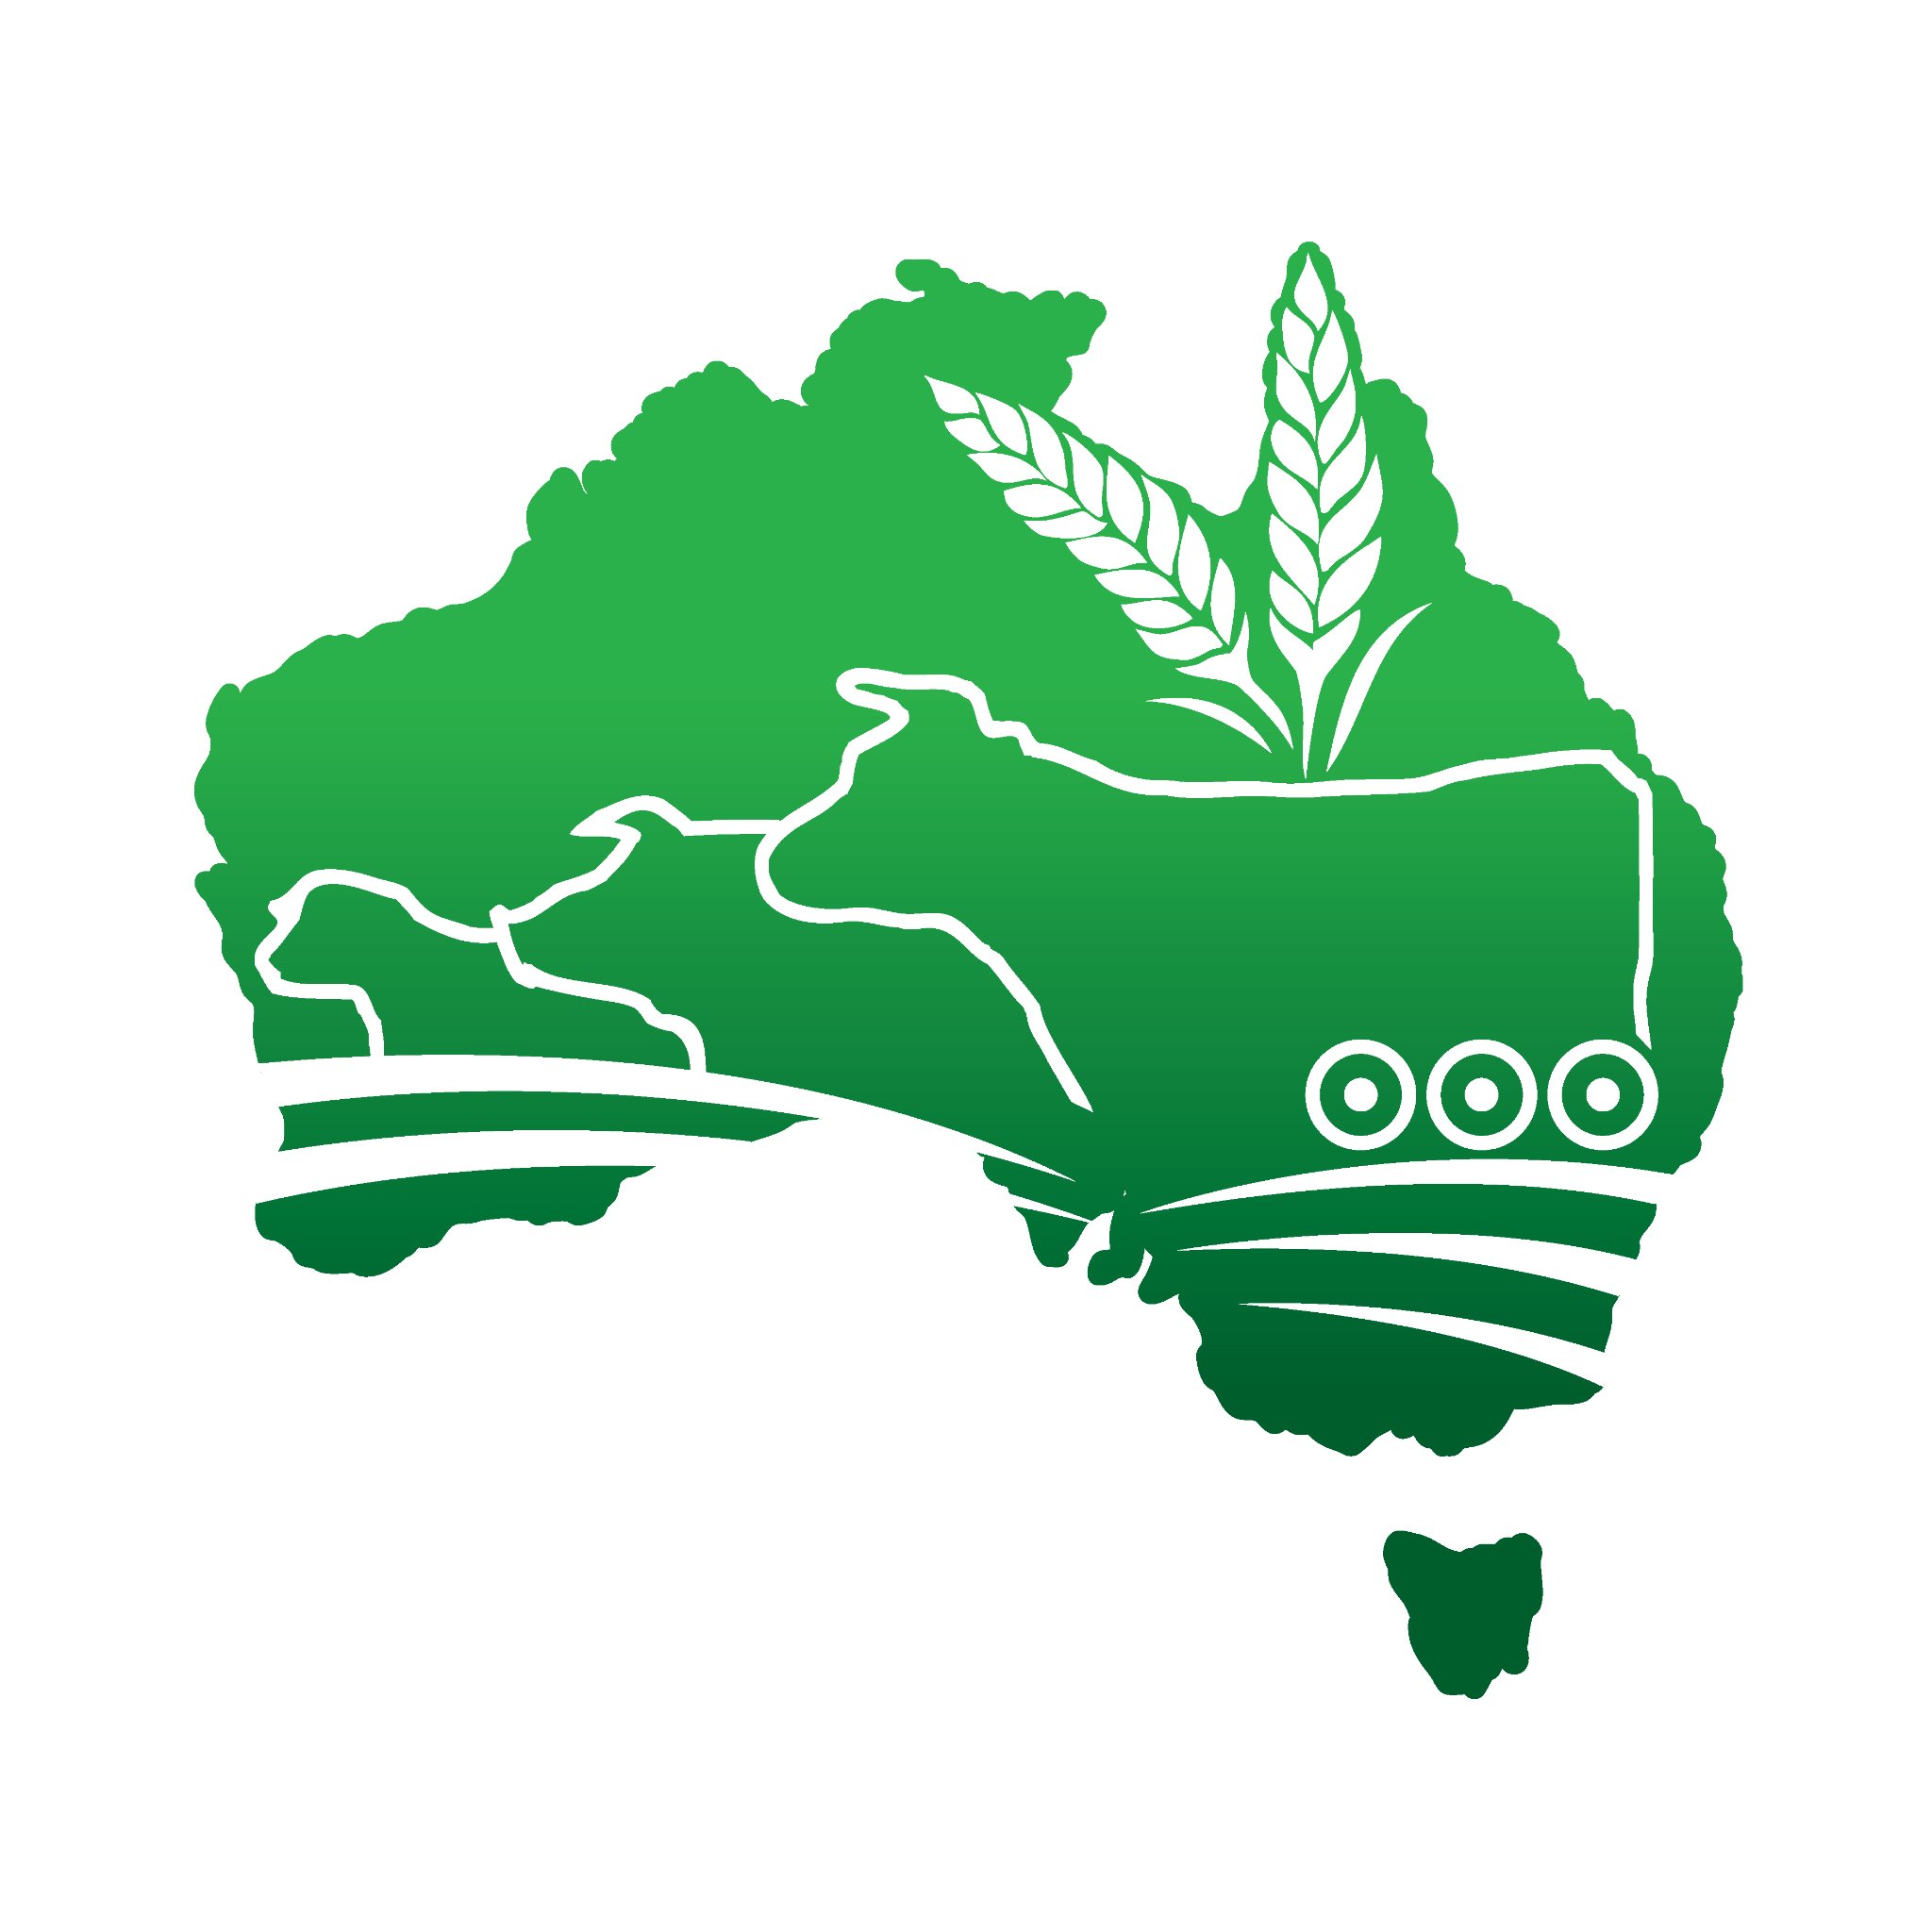 The Australian Livestock and Rural Transporters’ Association (ALRTA) represents hard-working regional and rural road transport companies.